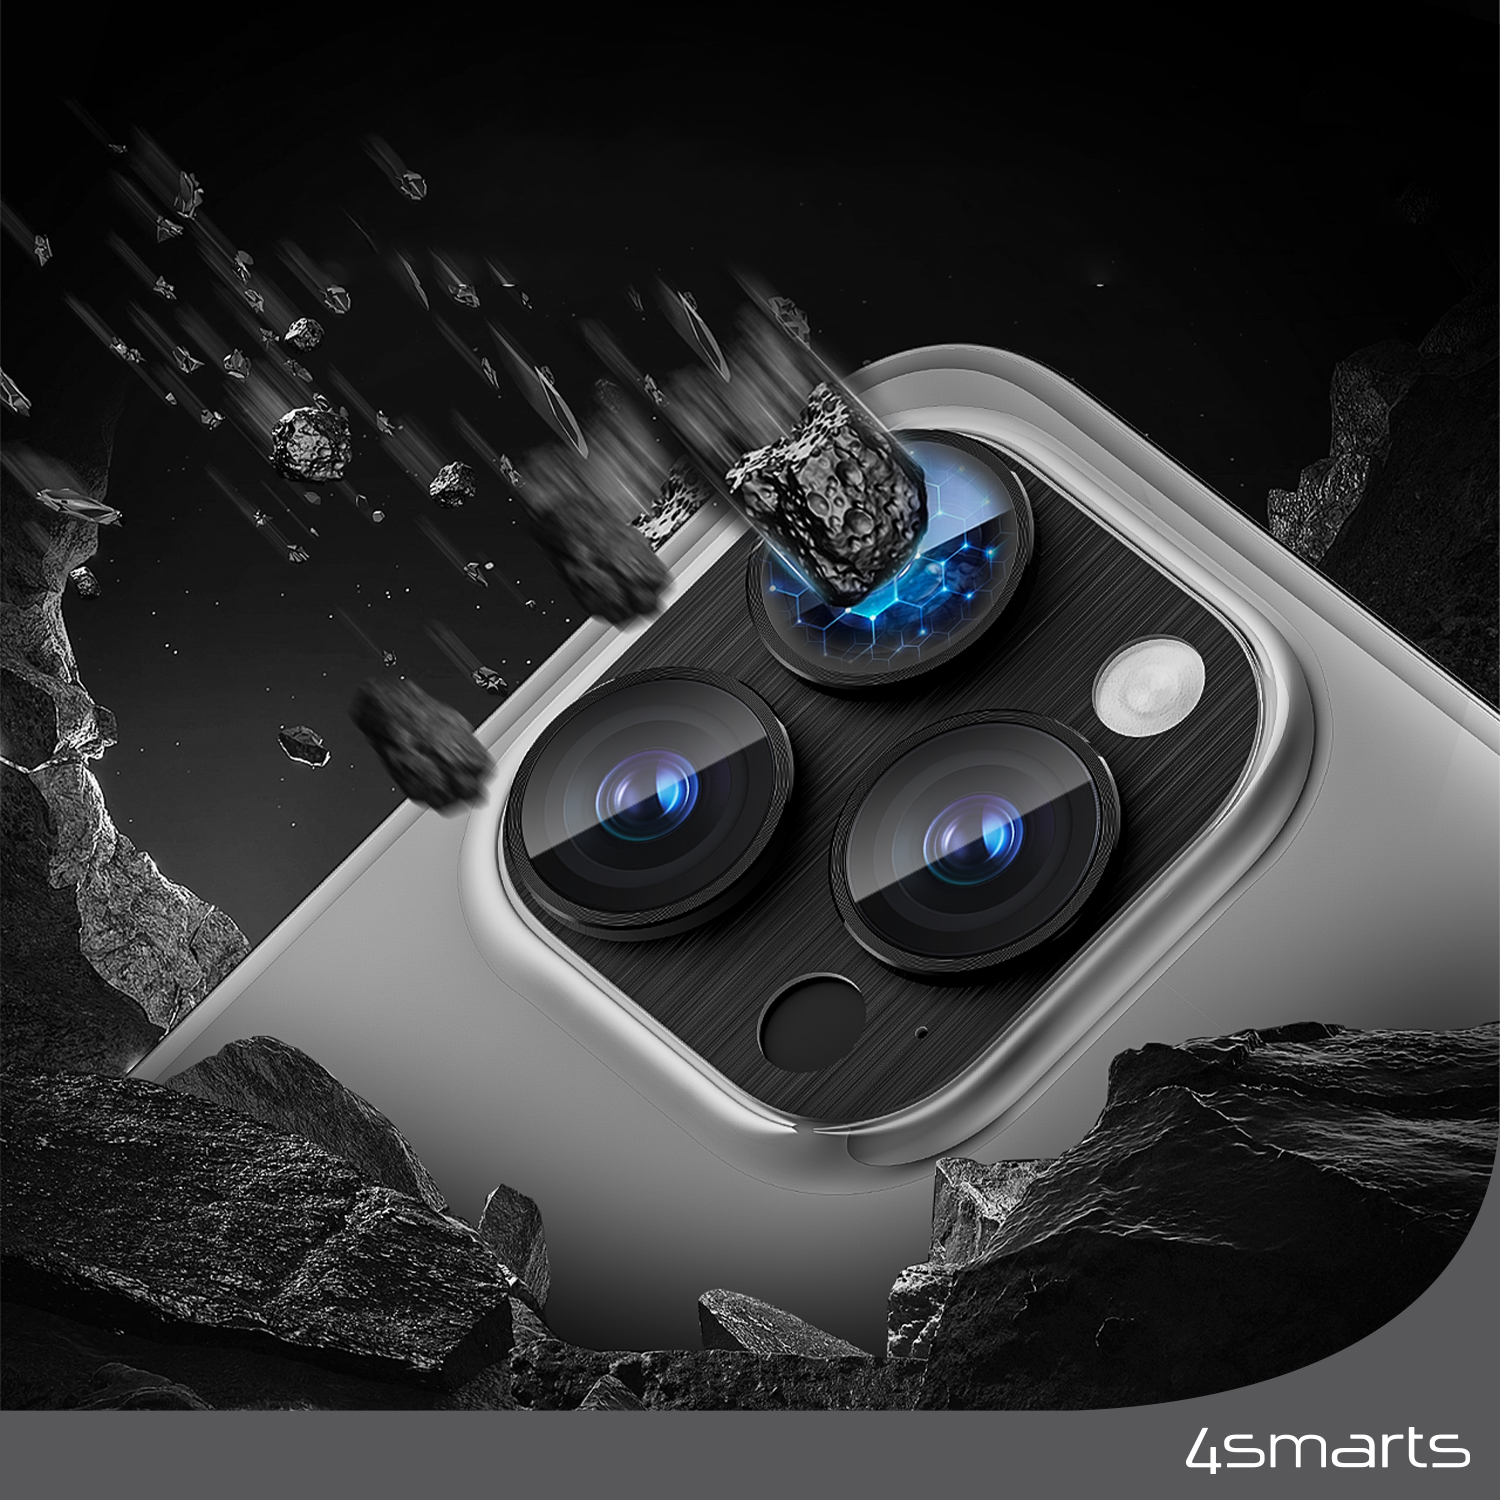 With its hardness rating of at least 9H, the 4smarts Lens Protector StyleGlass for Apple iPhone 15 Pro / 15 Pro Max Set of 2 offers extremely robust protection against scratches and bumps.